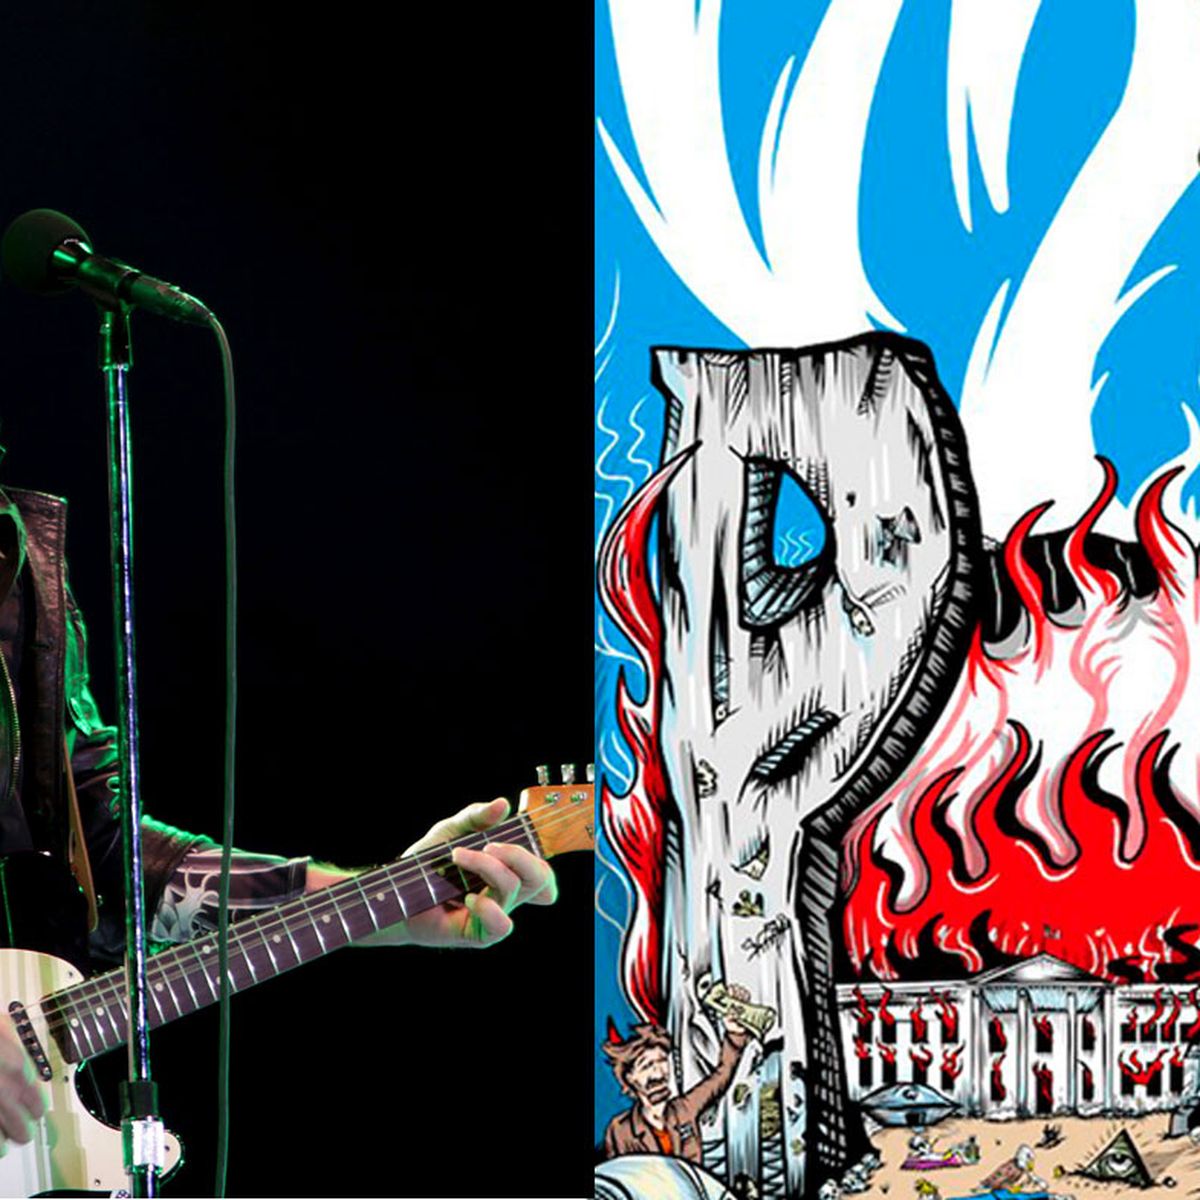 Pearl Jam unapologetic for White House poster